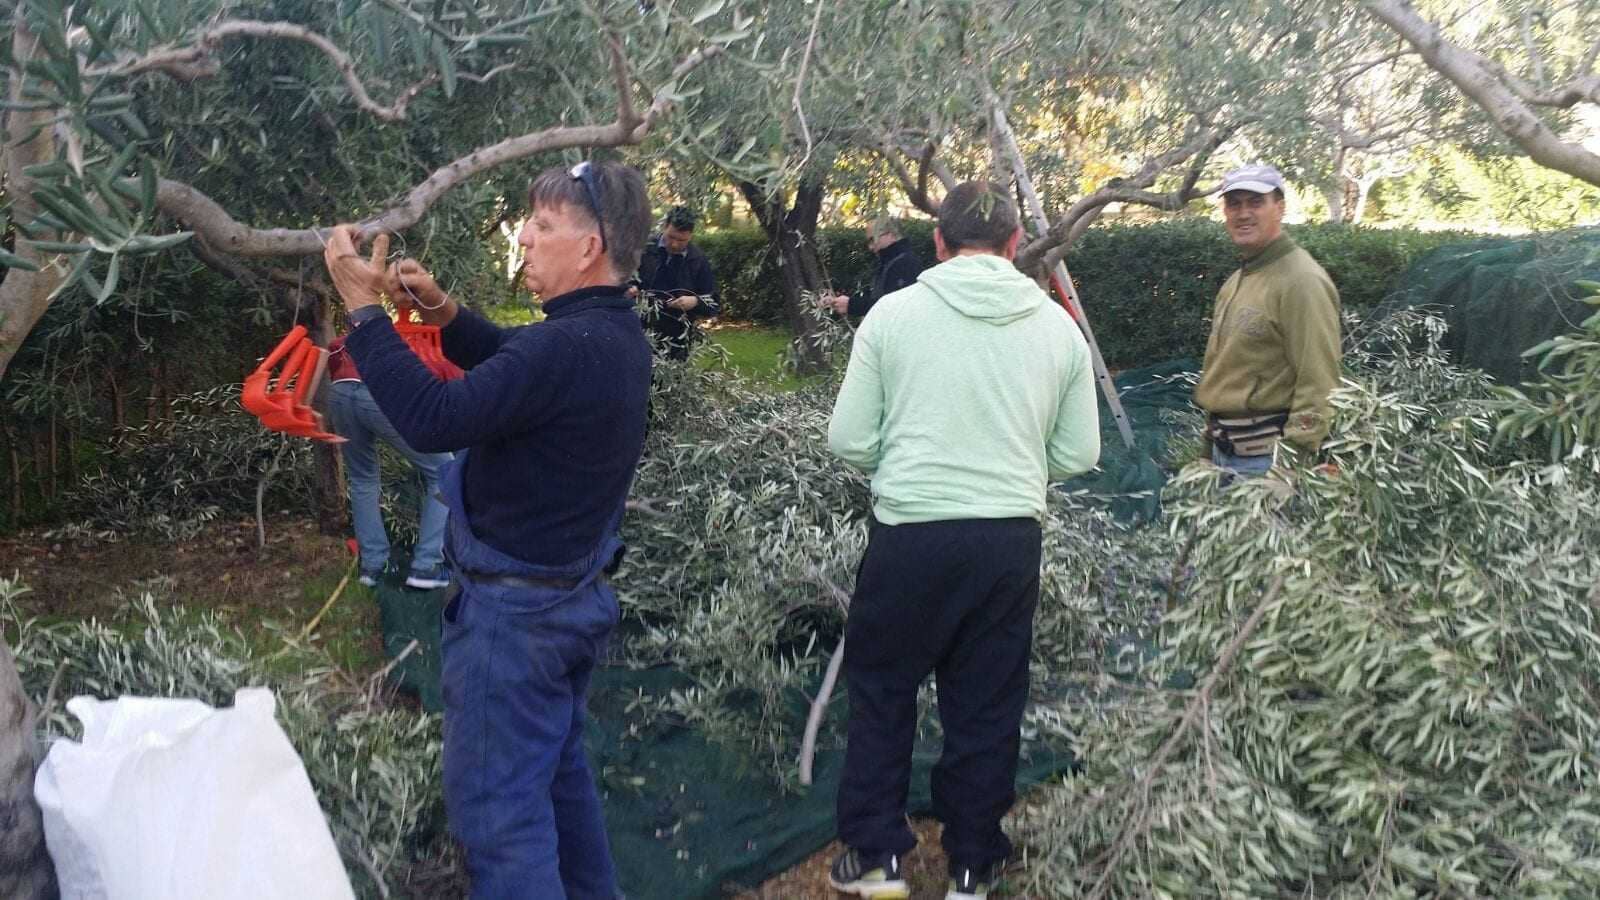 europe-production-world-volunteers-lend-a-hand-in-italys-olive-harvest-to-help-those-in-need-olive-oil-times